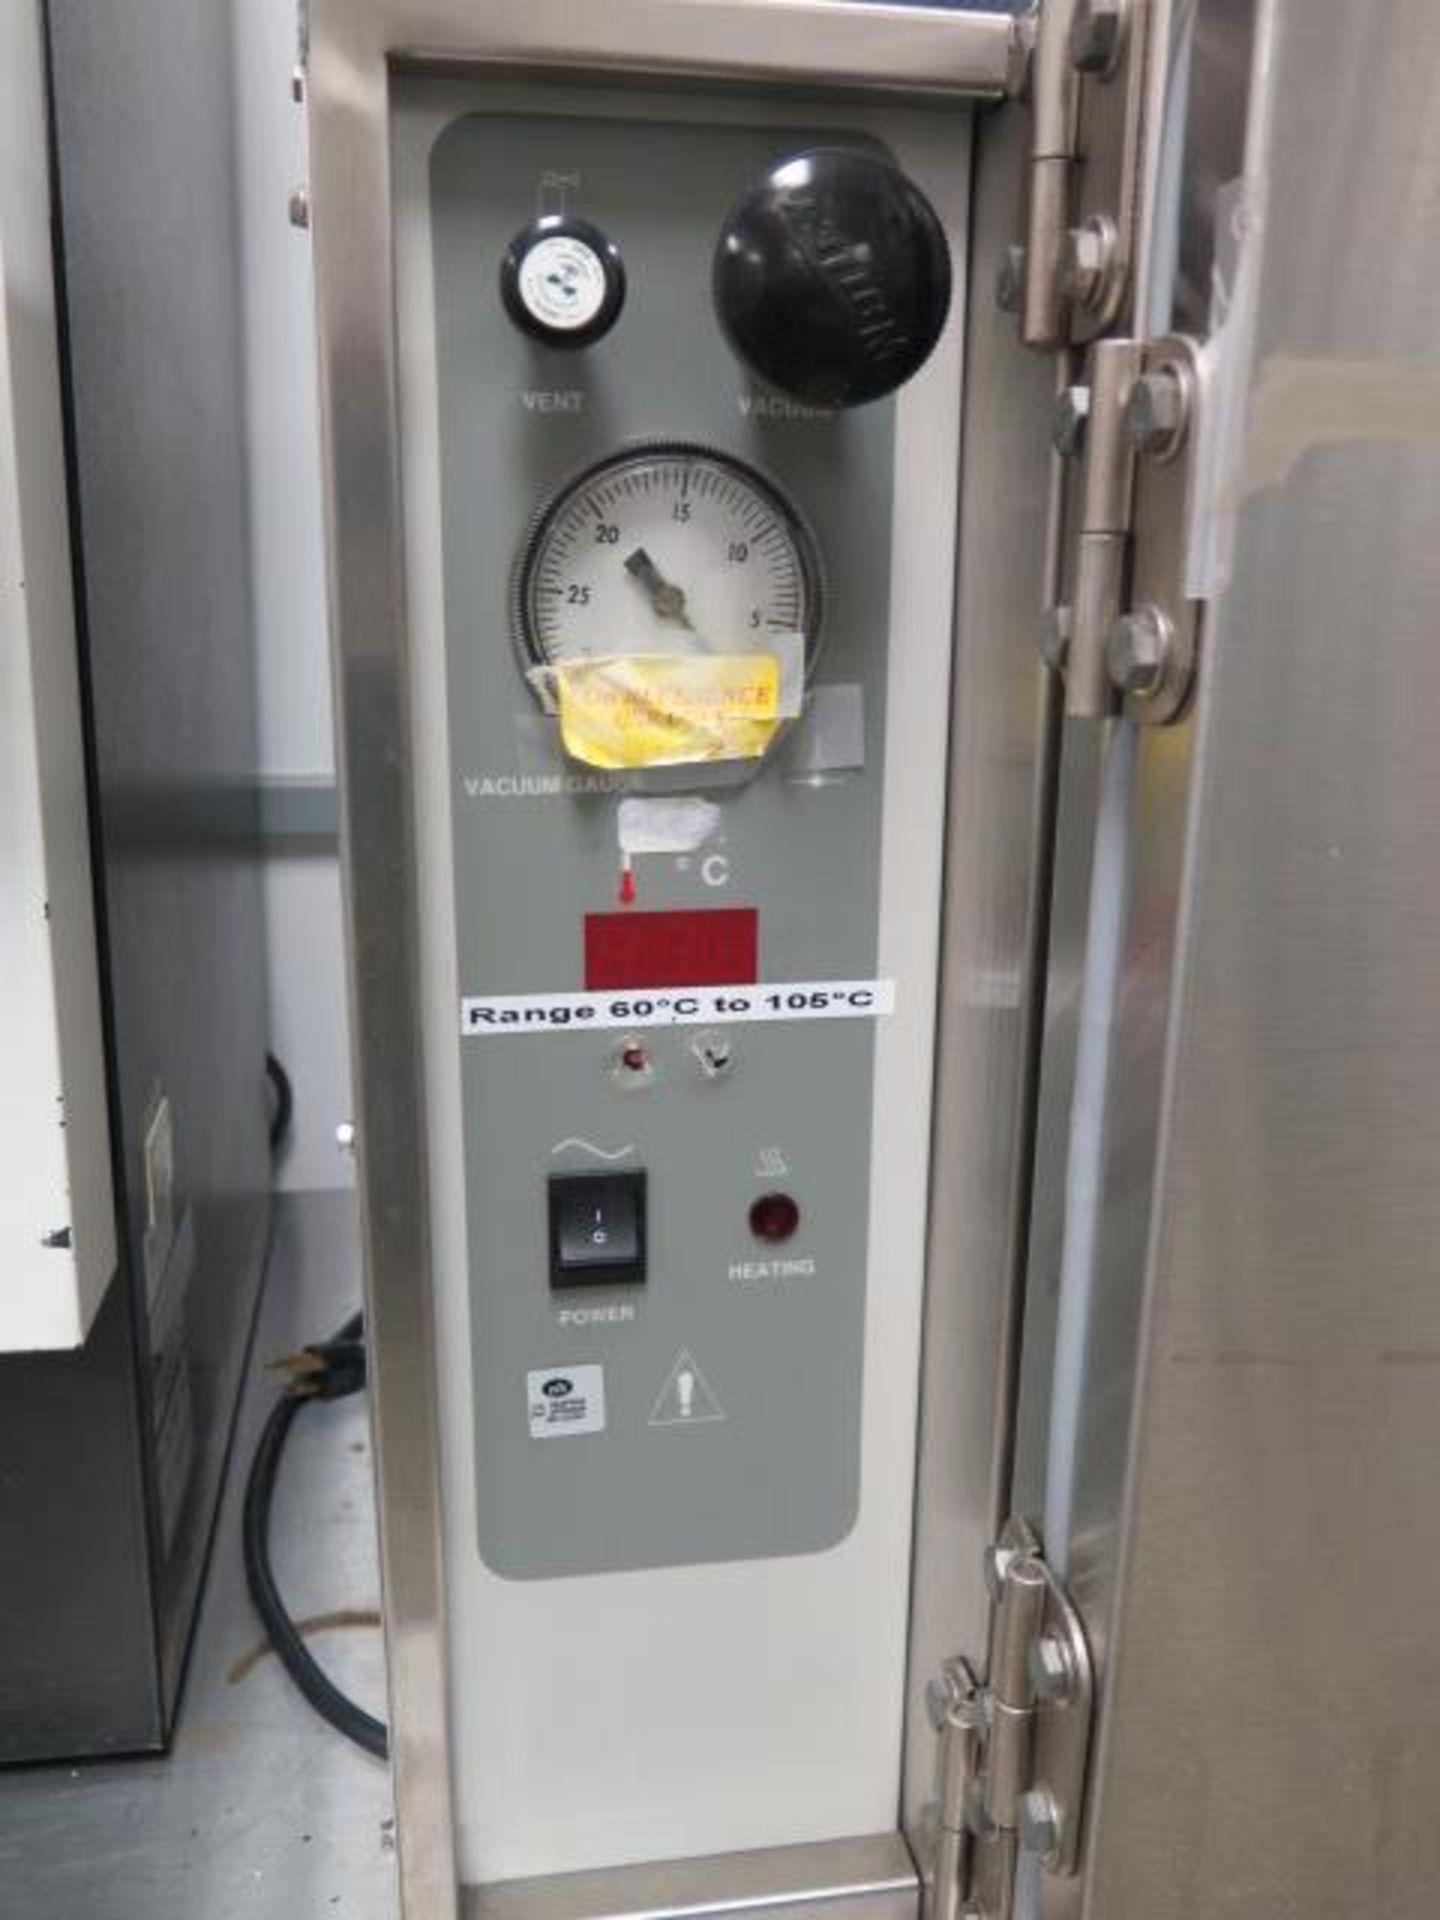 VWR mdl. 1430M Vacuum Oven s/n 1201098 60-105 Degrees C (SOLD AS-IS - NO WARRANTY) - Image 8 of 10